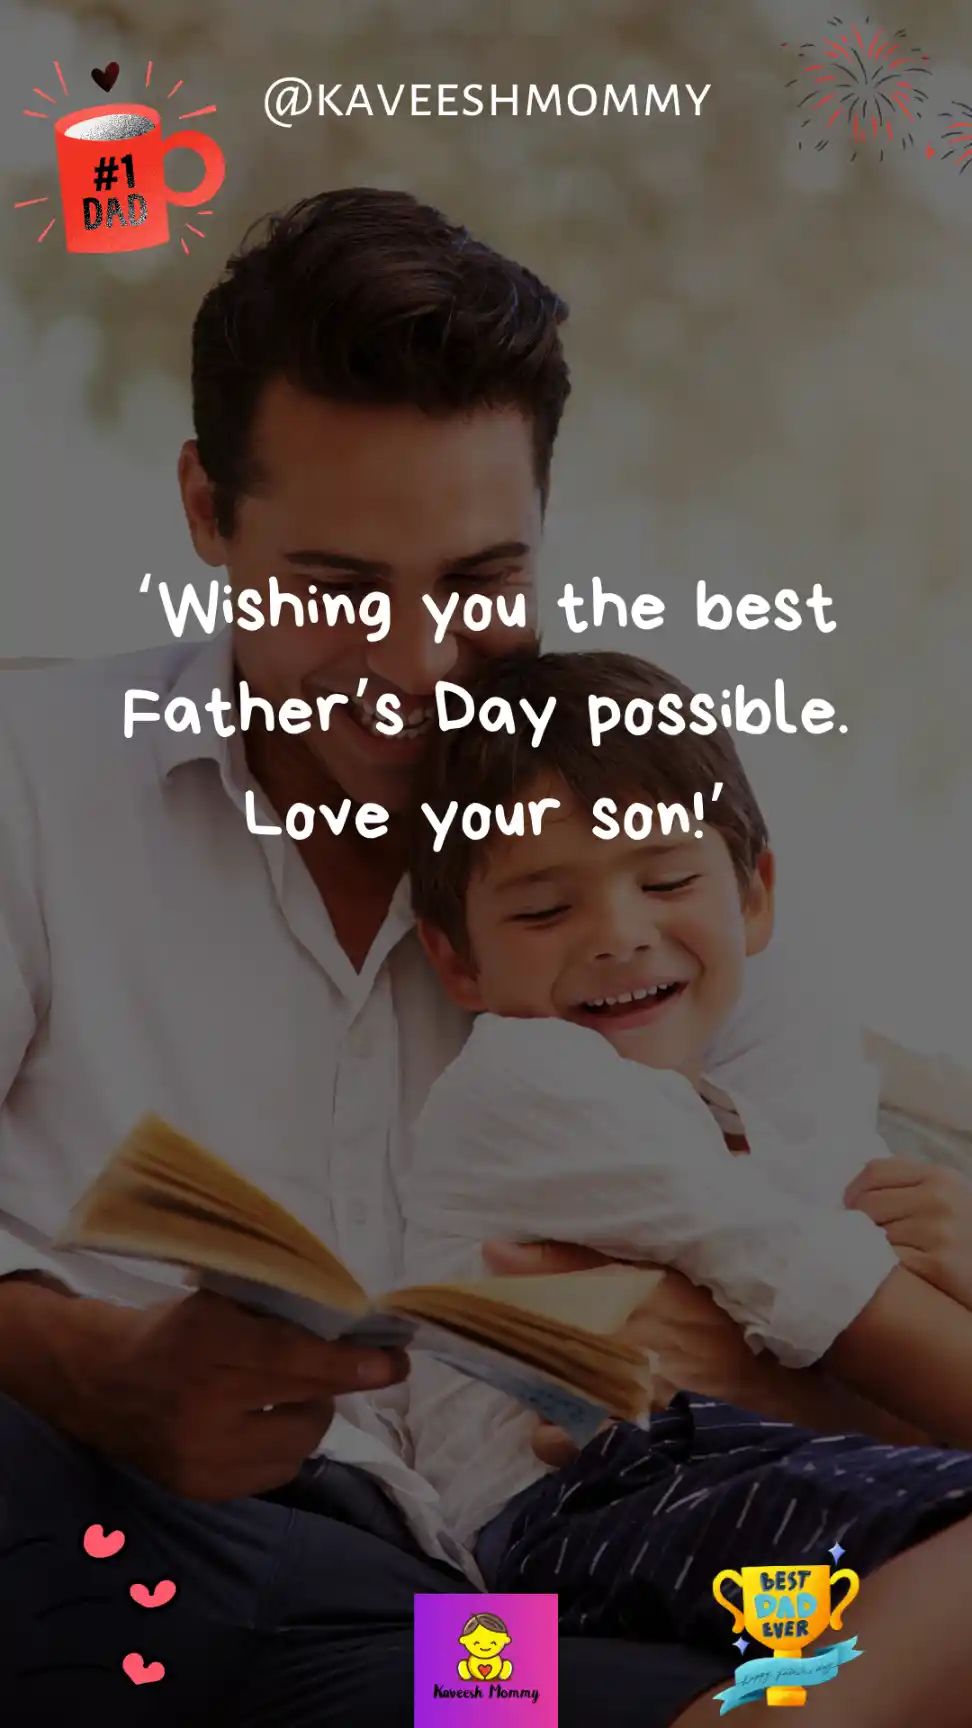 happy father's day wishes to son-‘Wishing you the best Father’s Day possible. Love your son!’